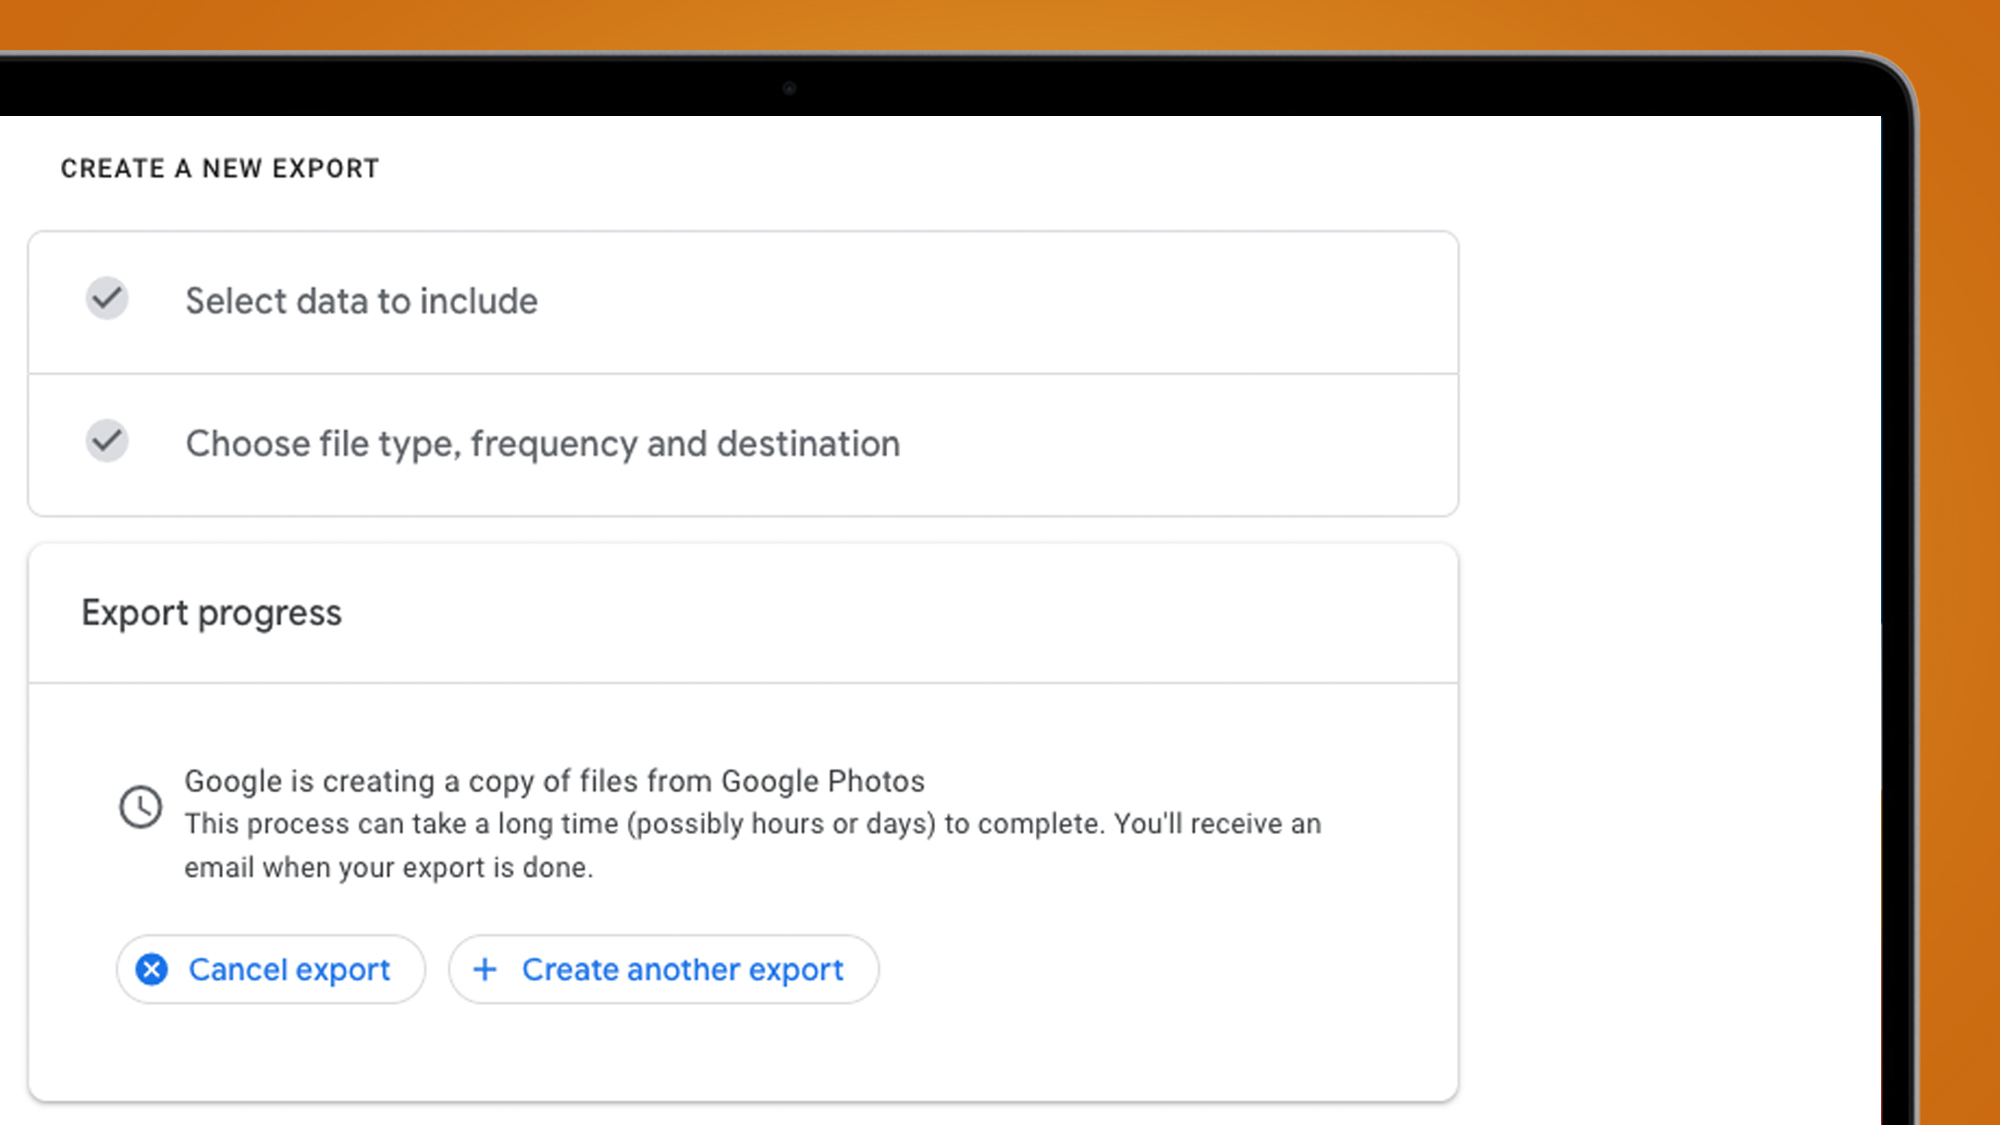 How to download all your Google Photos to your PC or Mac | TechRadar